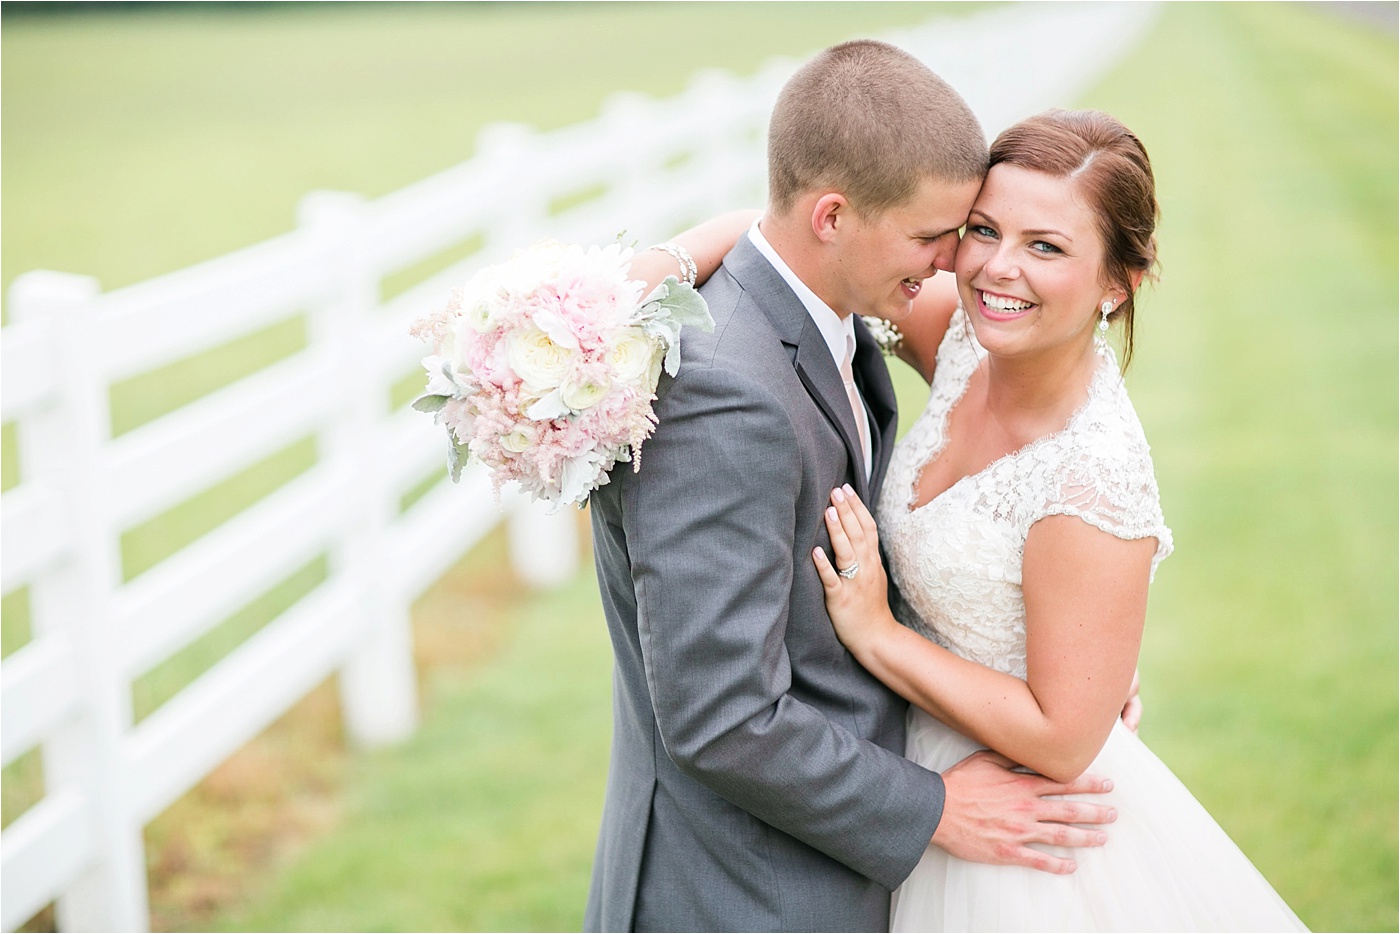 A Blush Outdoor wedding at Irongate Equestrian | KariMe Photography_0138